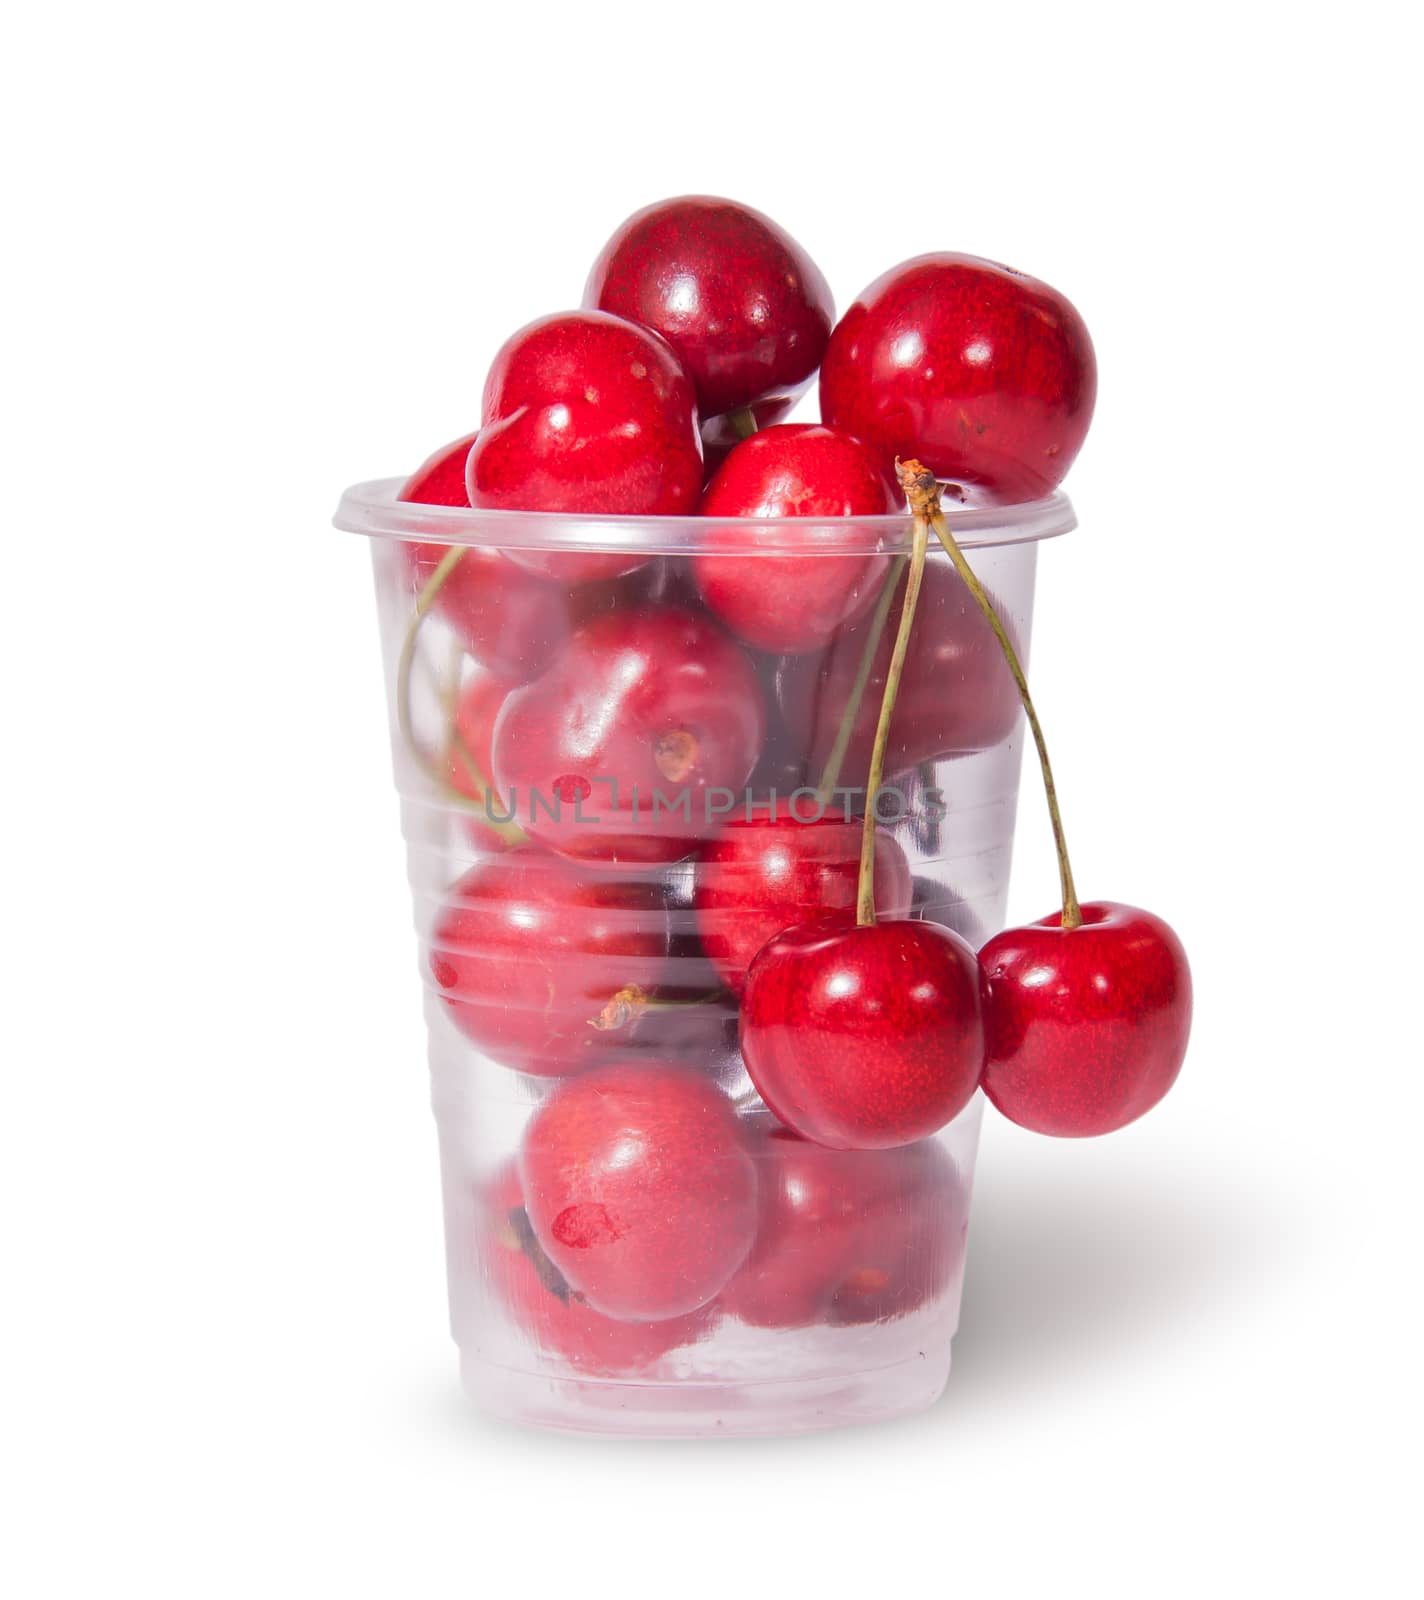 Red juicy sweet cherries in a plastic cup by Cipariss